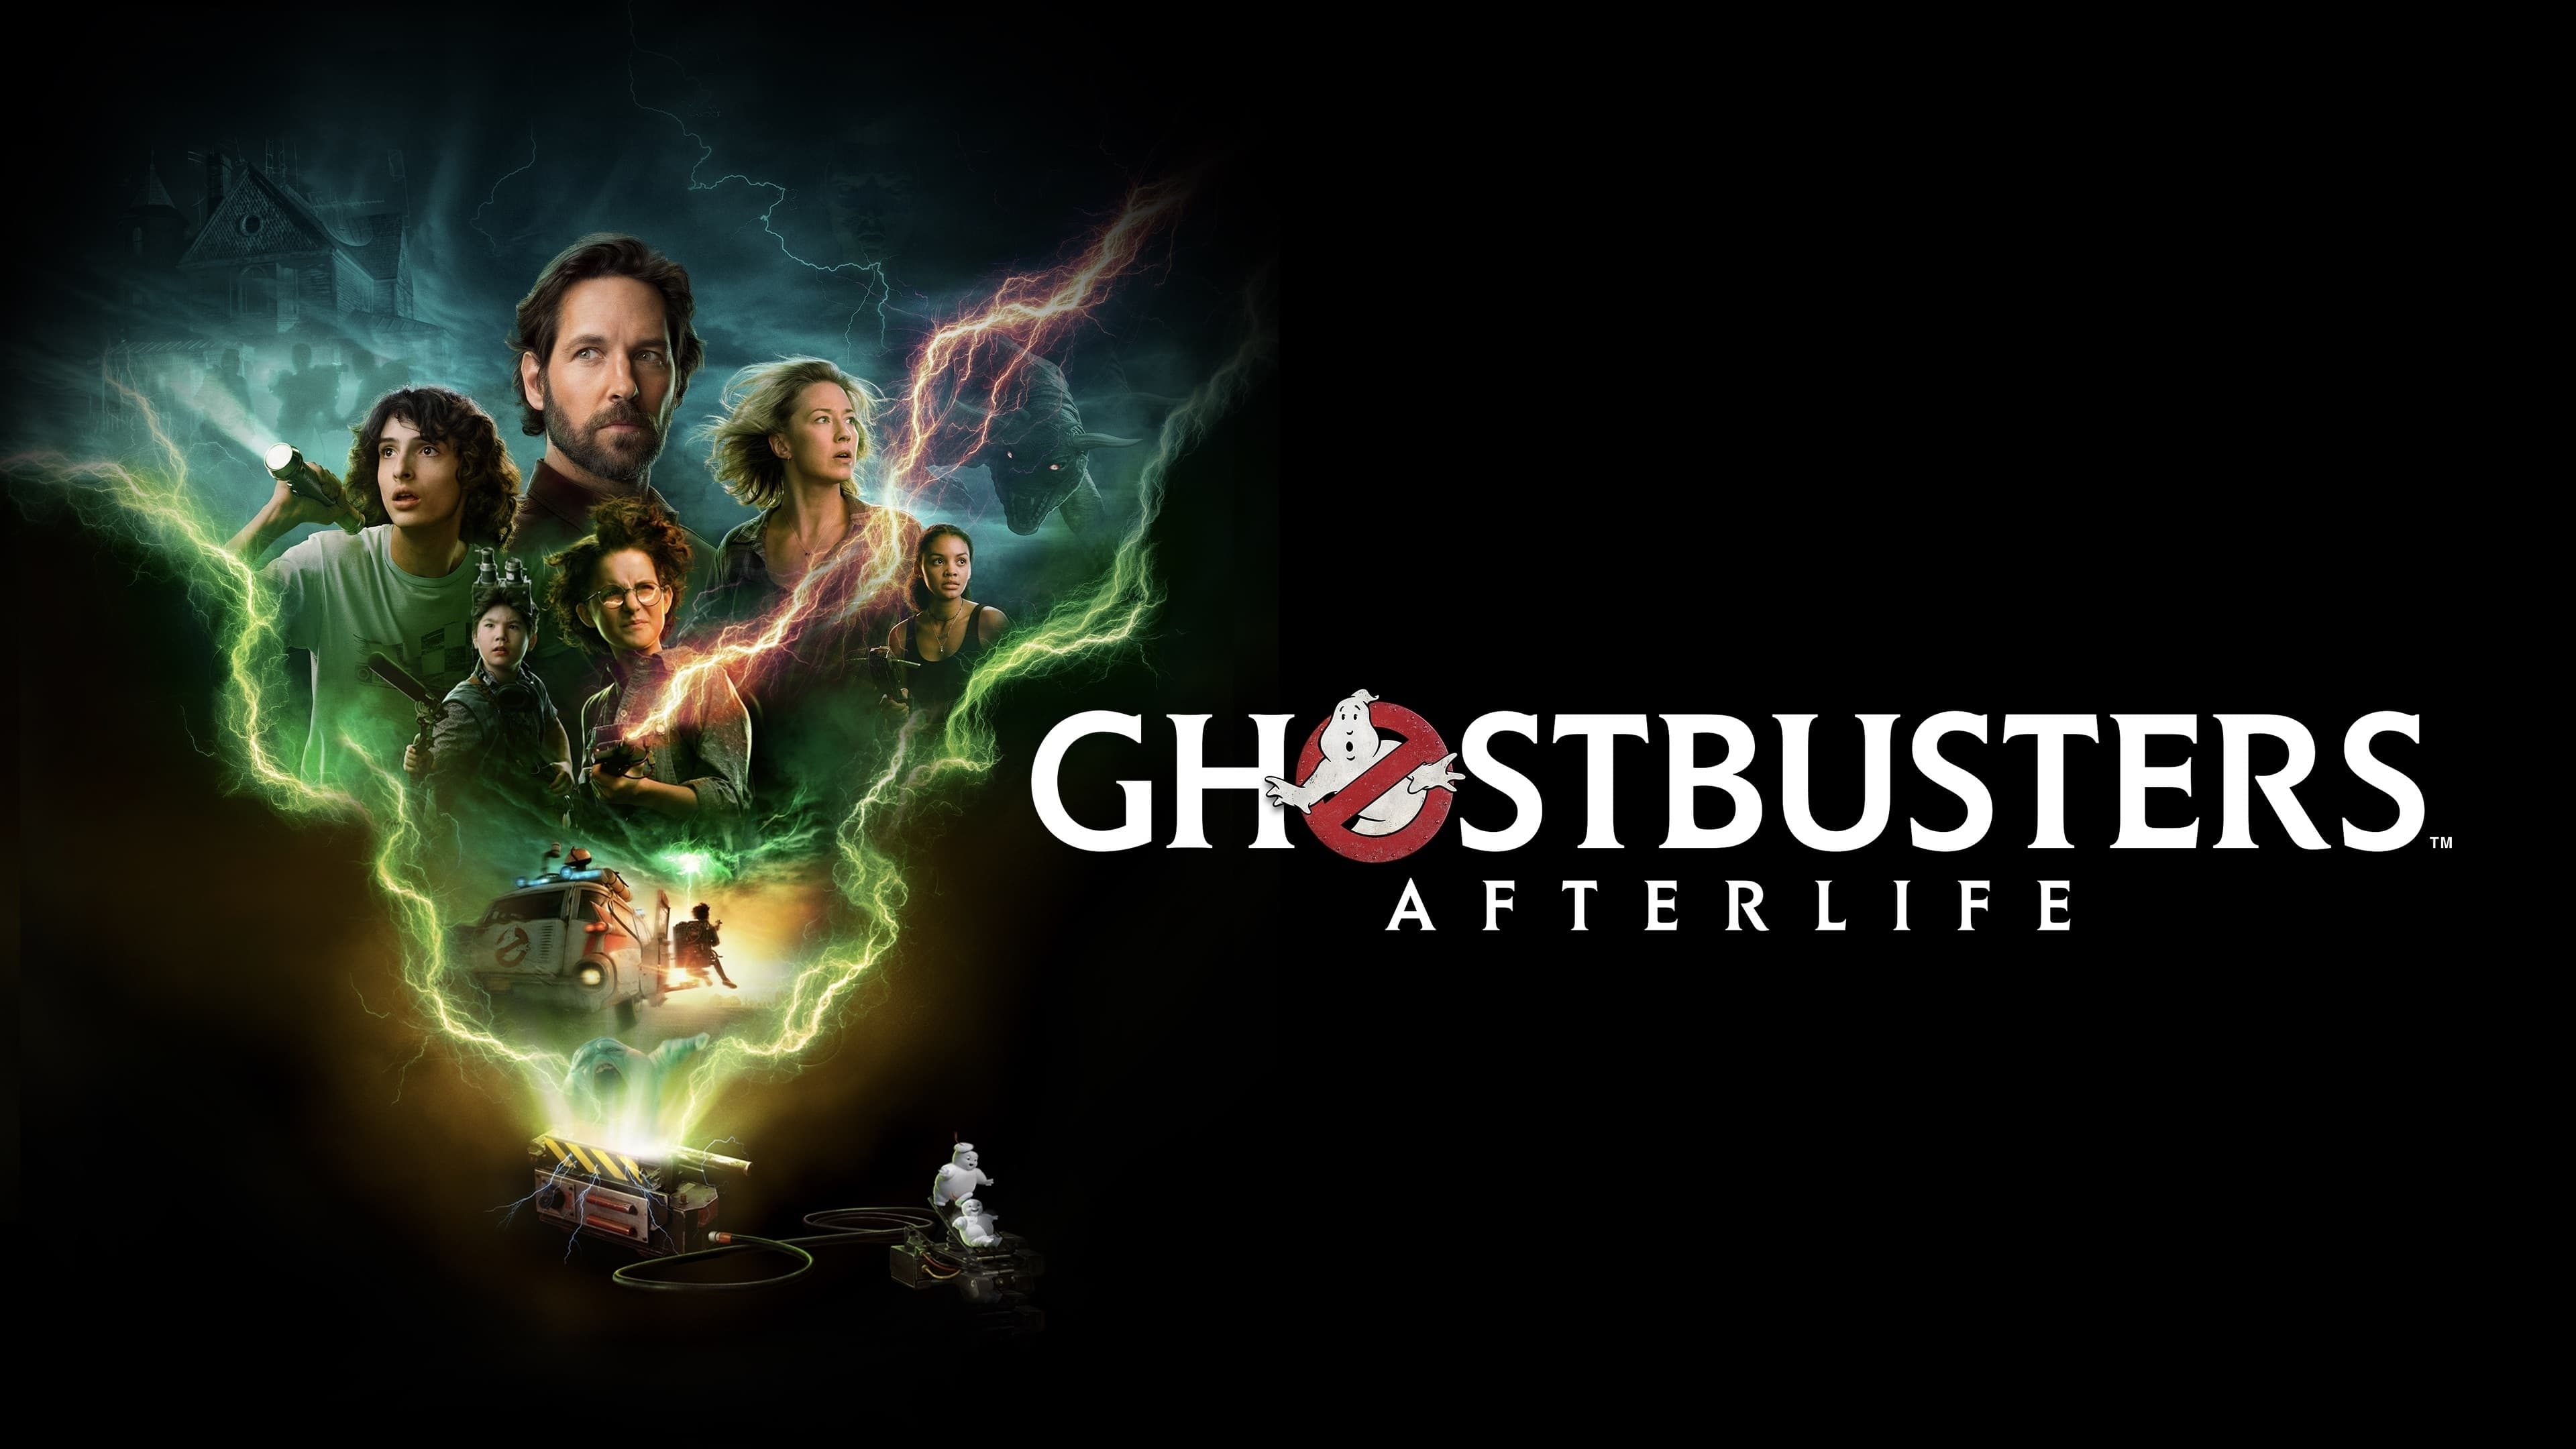 1920x133920 Ghostbusters Afterlife 4k Poster 1920x133920 Resolution